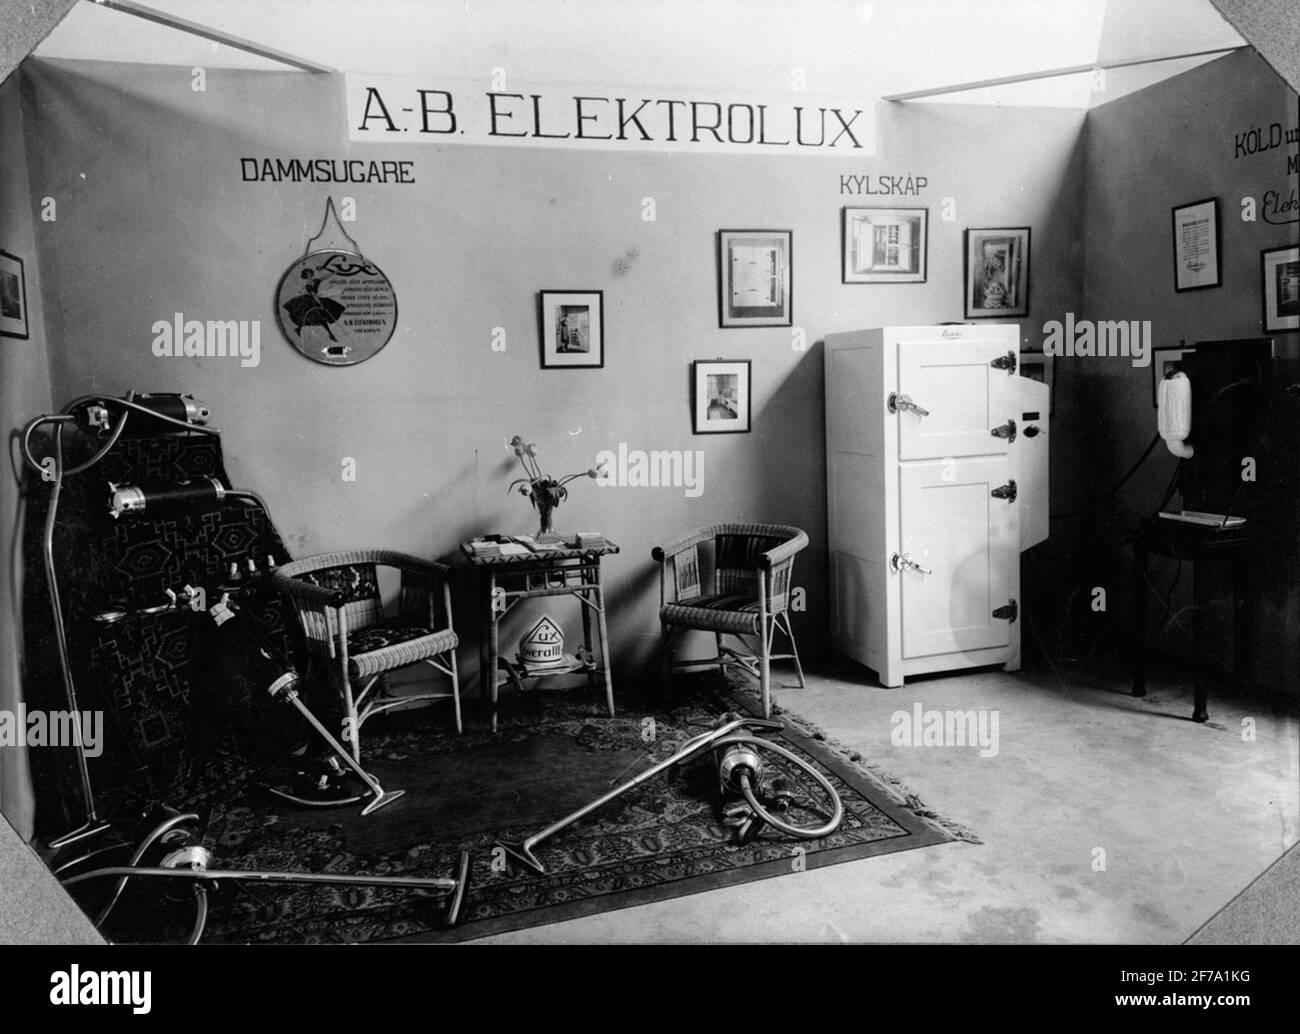 Electrolux vacuum cleaner and refrigerator in an interior of "home exhibition in Borås". Stock Photo